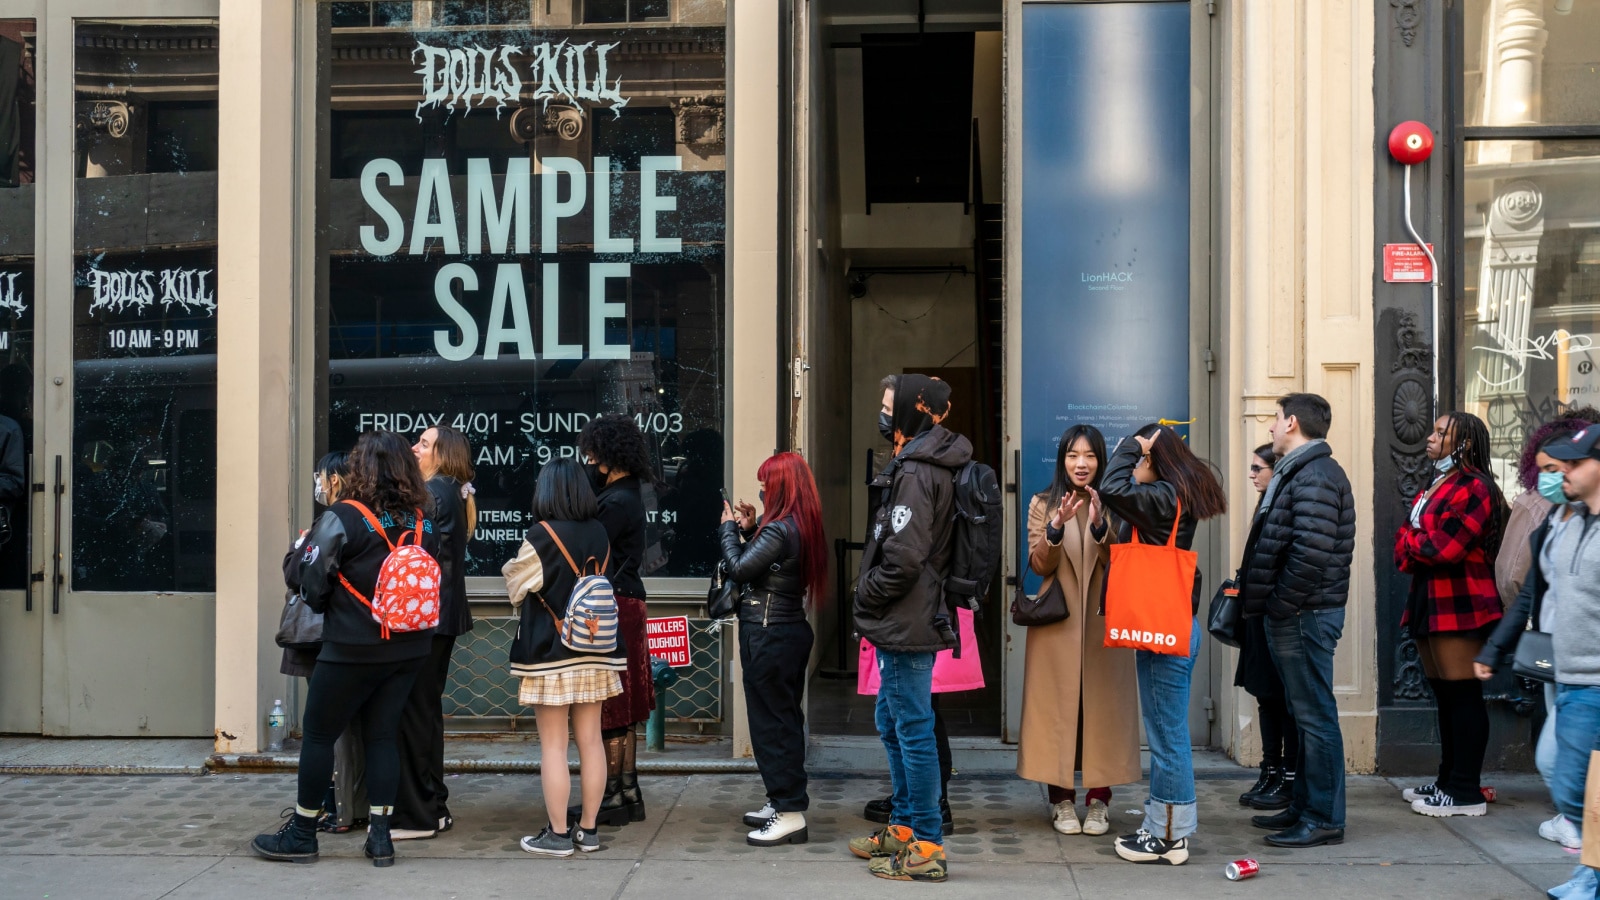 New York NY USA-April 2, 2022 Shoppers in Soho in New York wait in line for the Dolls Kill brand sample sale